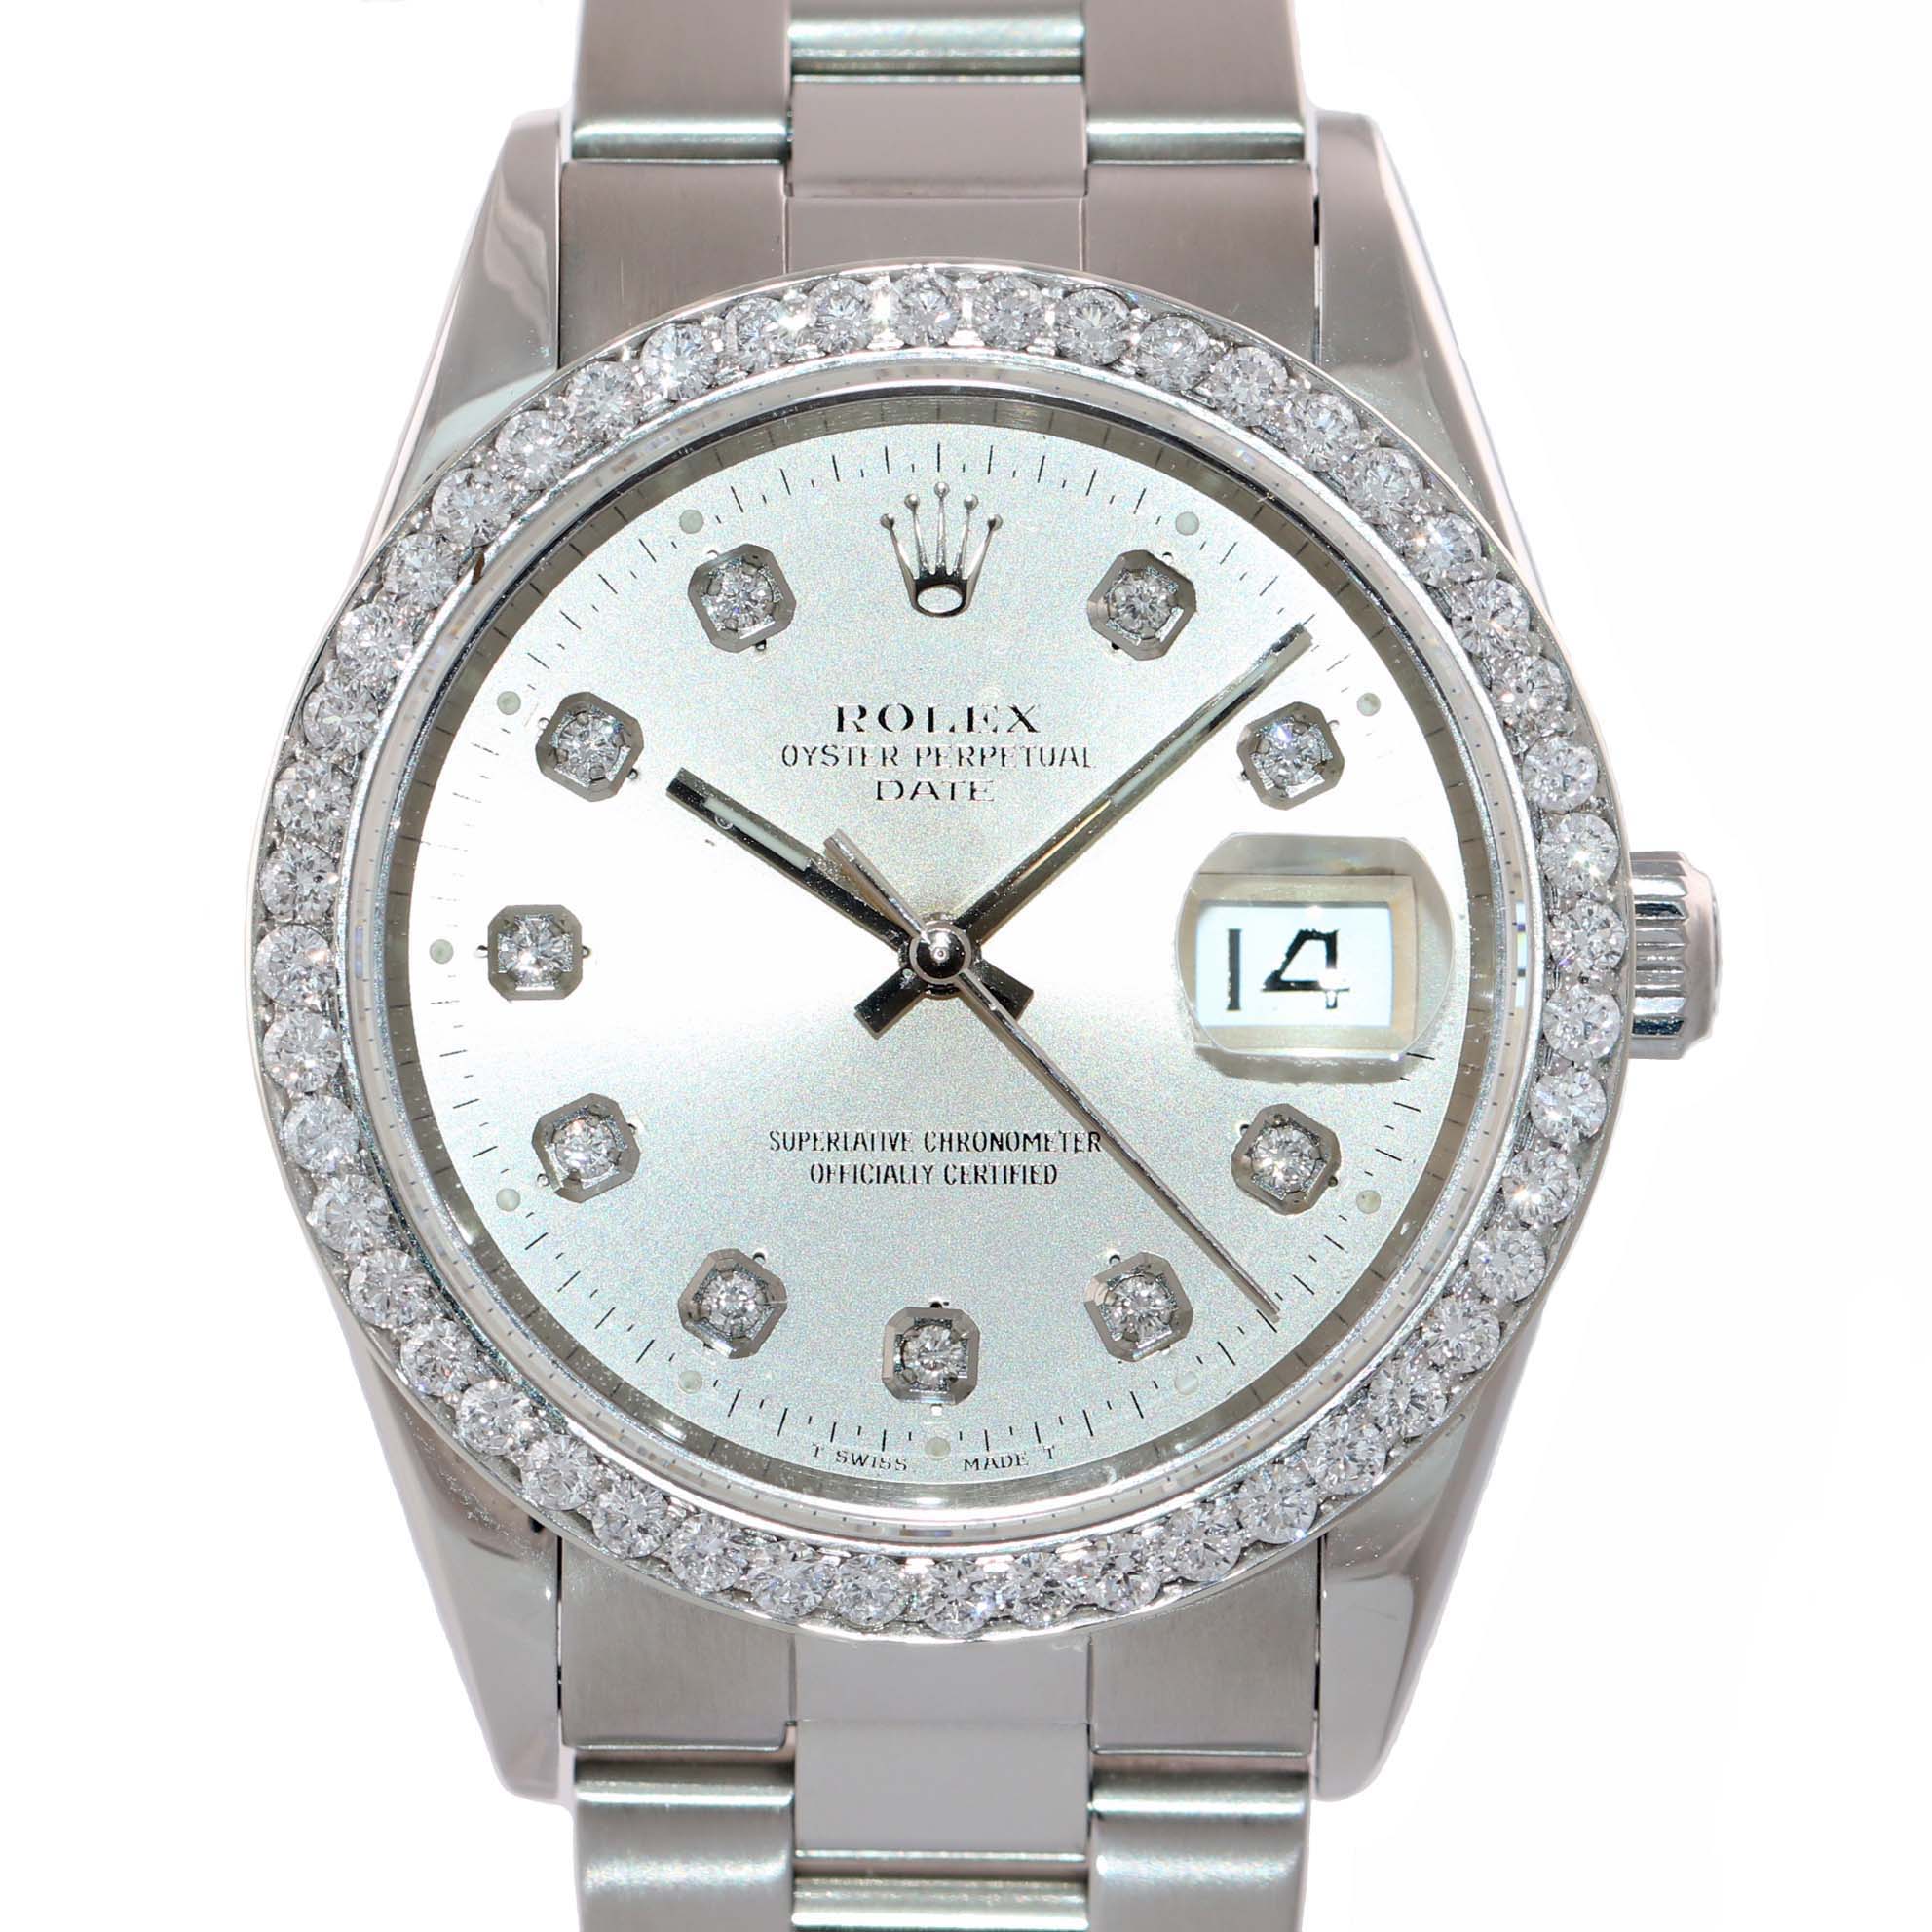 DIAMONDS Rolex Date Oyster Perpetual Stainless Steel White Stick 15200 34mm Watch N8